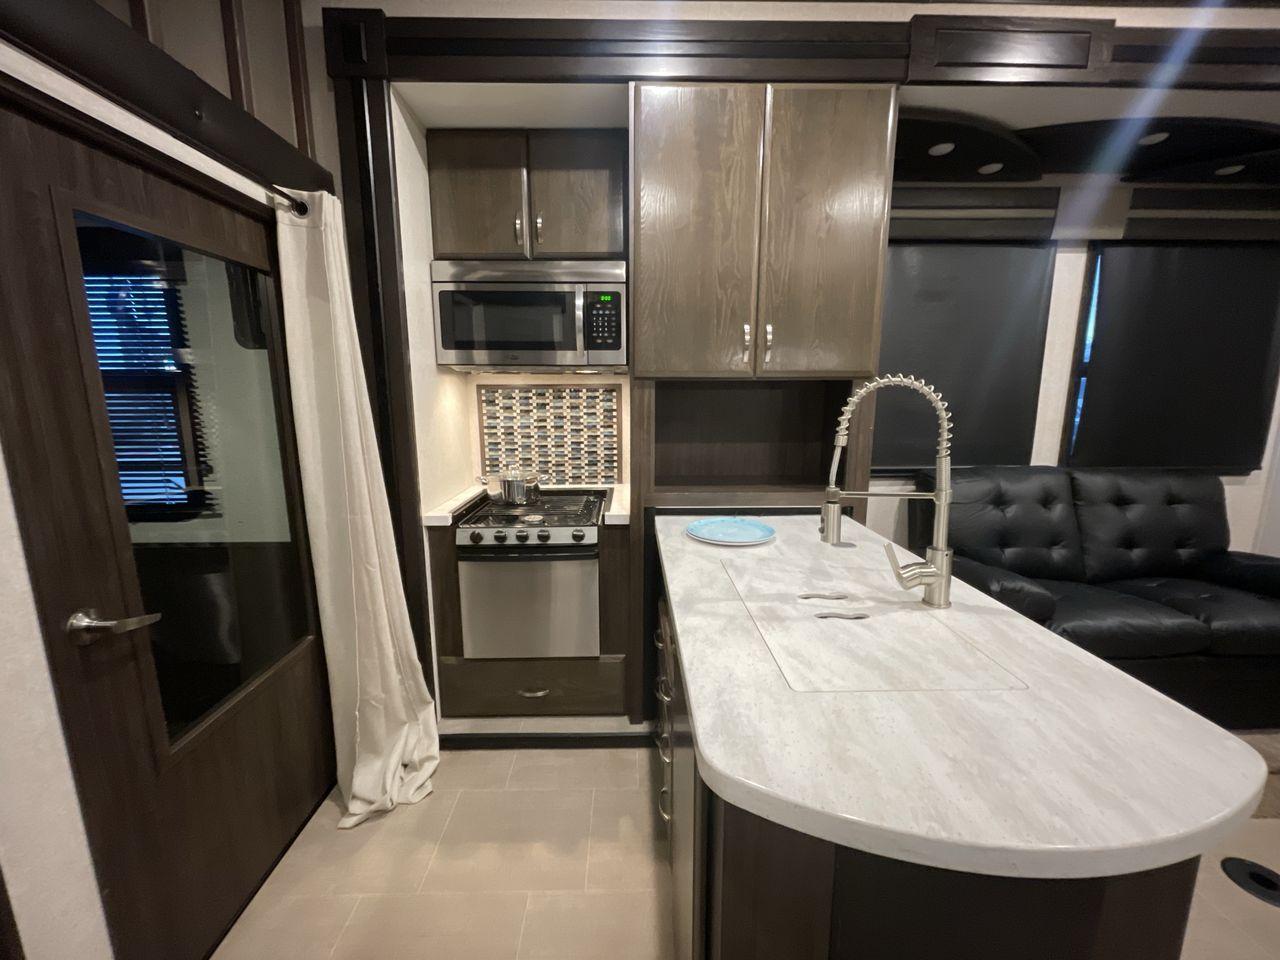 2018 GRAY JAYCO SEISMIC 4250 - (1UJCJSCV5J1) , Length: 44.92 ft. | Dry Weight: 15,570 lbs. | Gross Weight: 20,000 lbs. | Slides: 3 transmission, located at 4319 N Main St, Cleburne, TX, 76033, (817) 678-5133, 32.385960, -97.391212 - Set out to the great outdoors in this 2018 Jayco Seismic 4250 and enjoy all its amenities! This toy hauler measures just a bit under 45 ft. in length and 13.32 ft. in height, providing great space and comfort. It has a dry weight of 15,570 lbs. and a GVWR of 20,000 lbs. It also comes with automatic - Photo #14